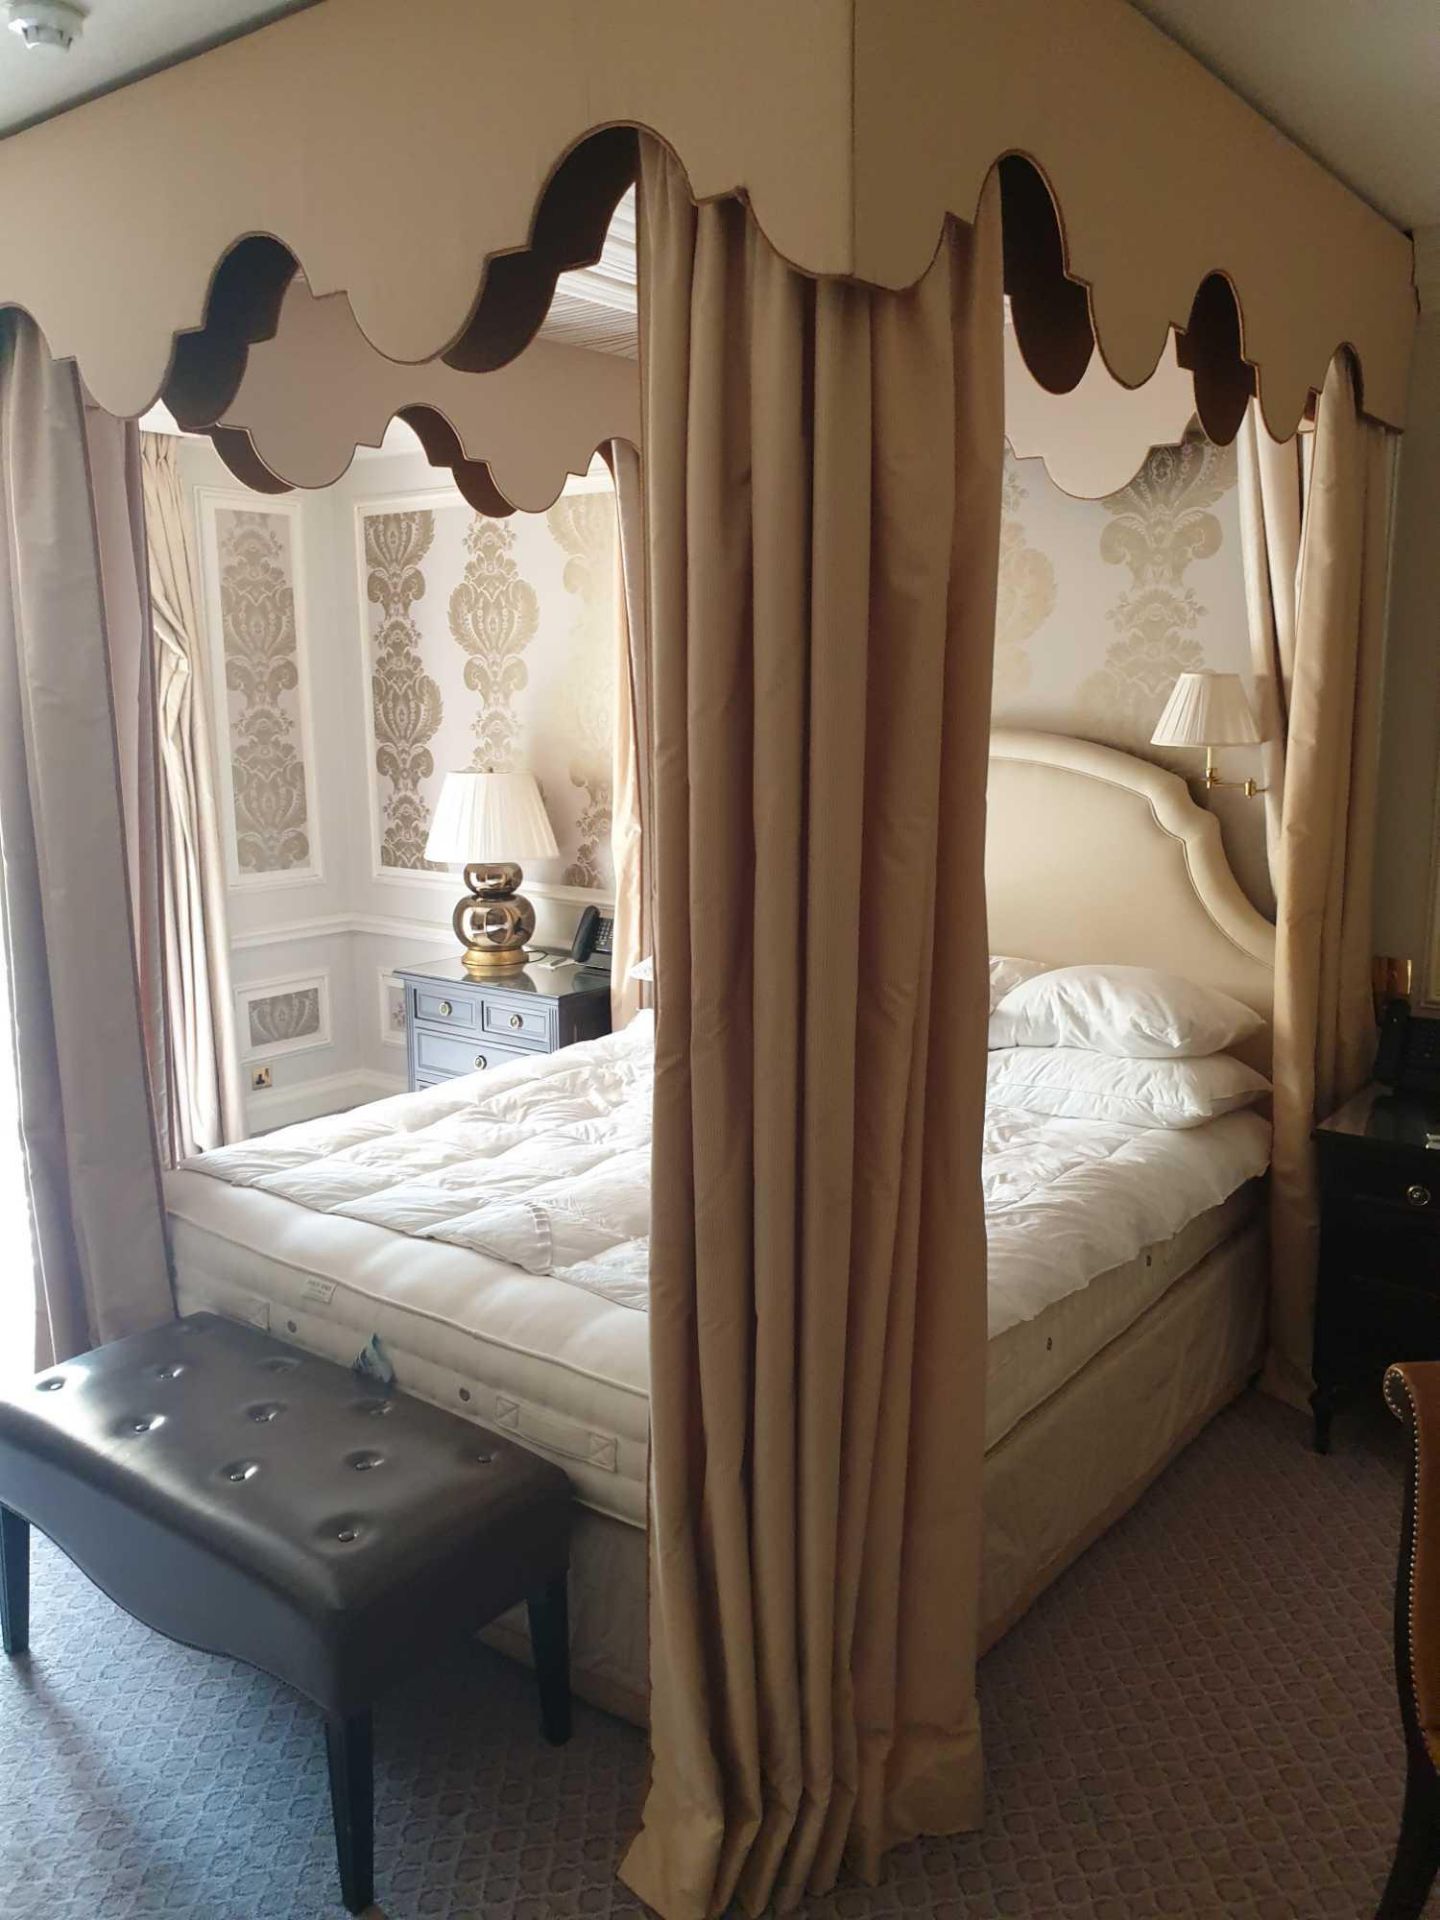 Bed Canopy Cream And Brown Floating Pelmet And Cream Headboard Silk Curtains Fully Lined Outer